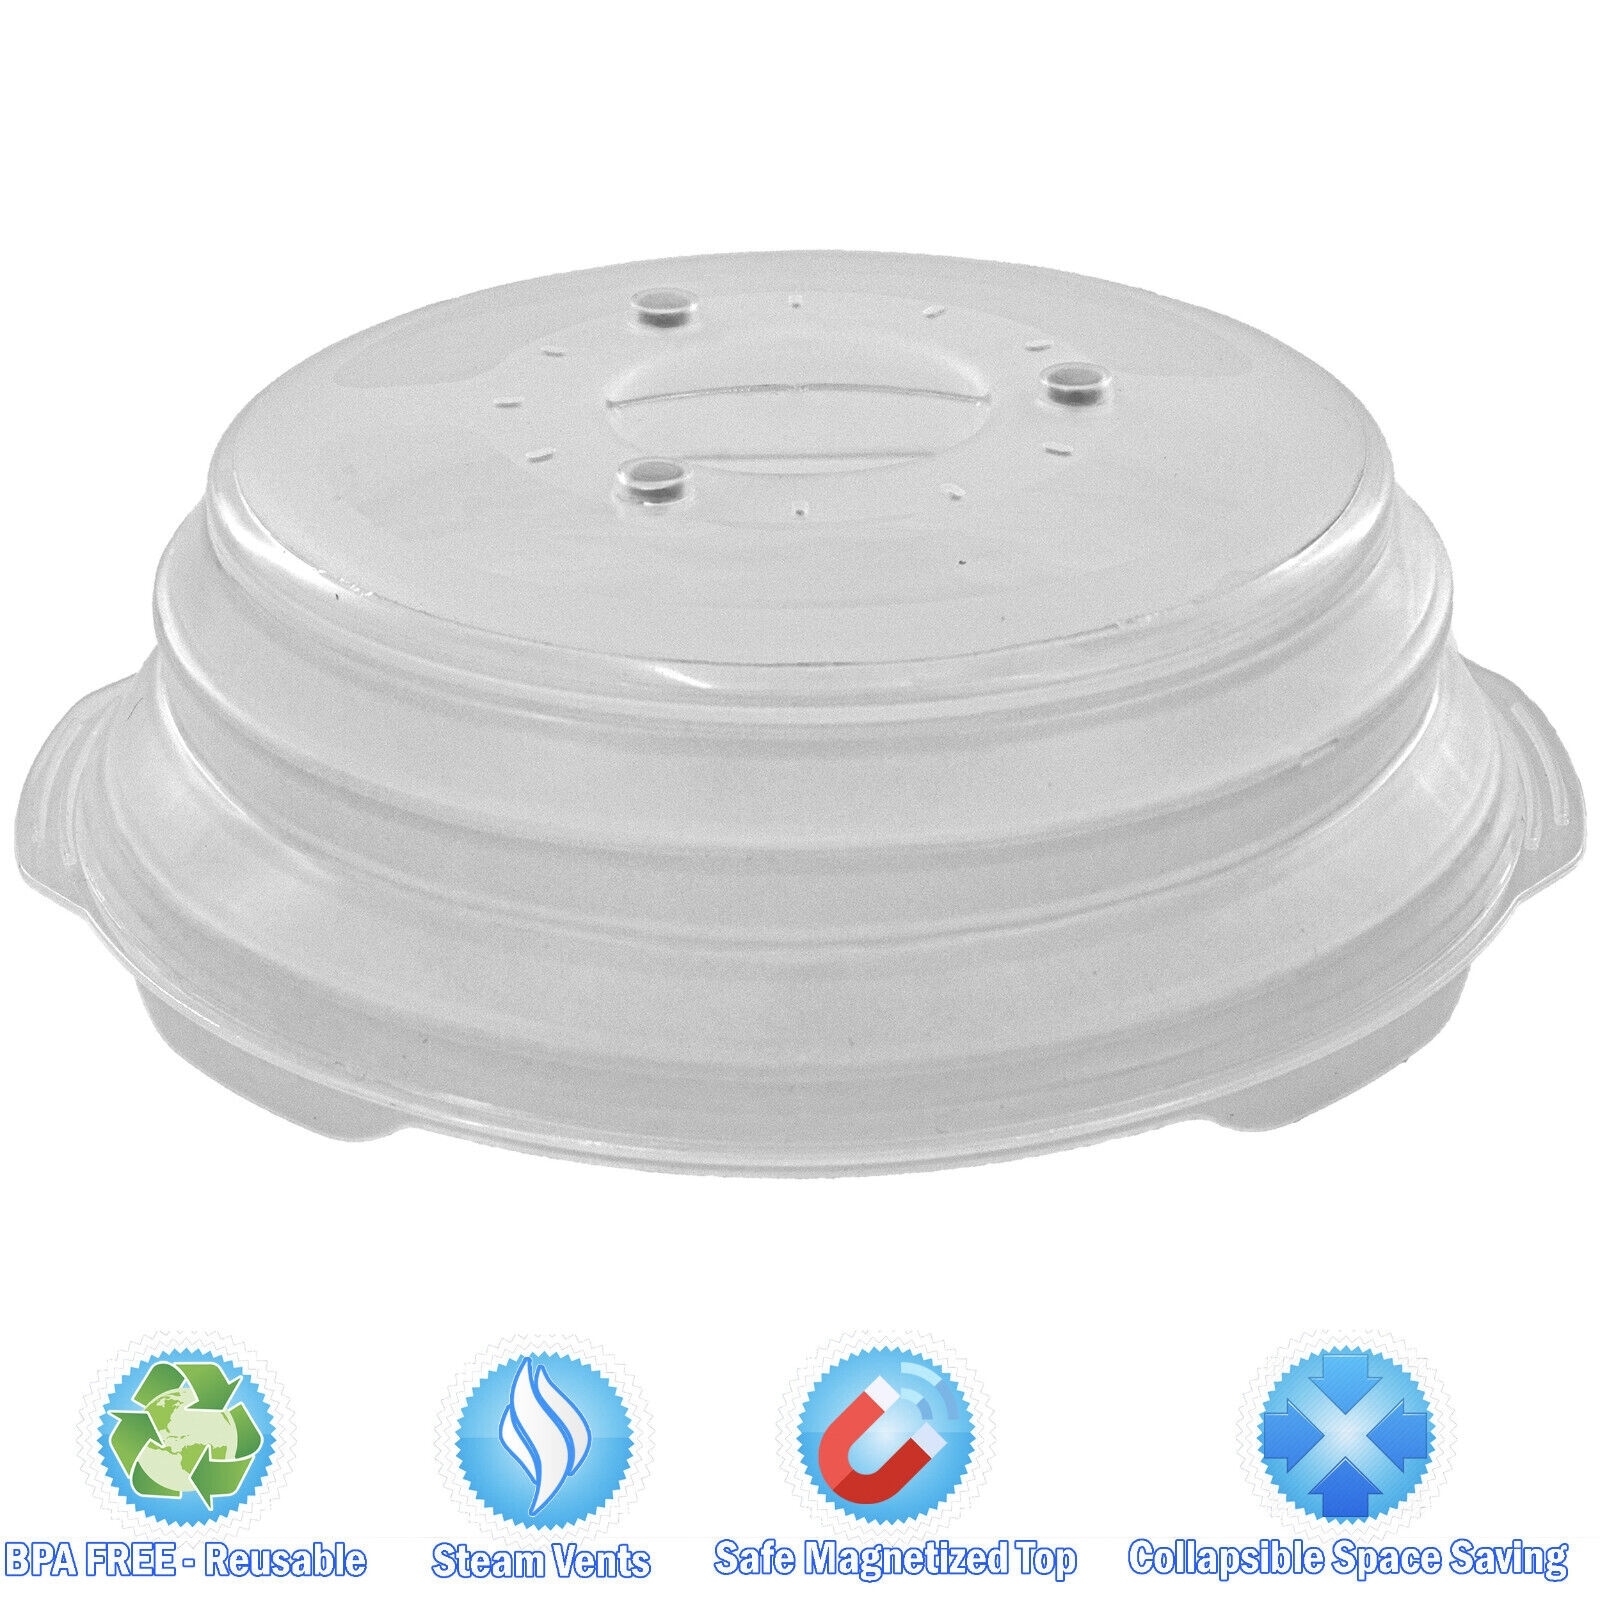 https://ak1.ostkcdn.com/images/products/is/images/direct/3d151c83e8860773d434ffdd4d1f3775fde43ebf/Magnetic-Microwave-Food-Cover-Lid-with-Collapsible-Anti-Splatter-Guard.jpg